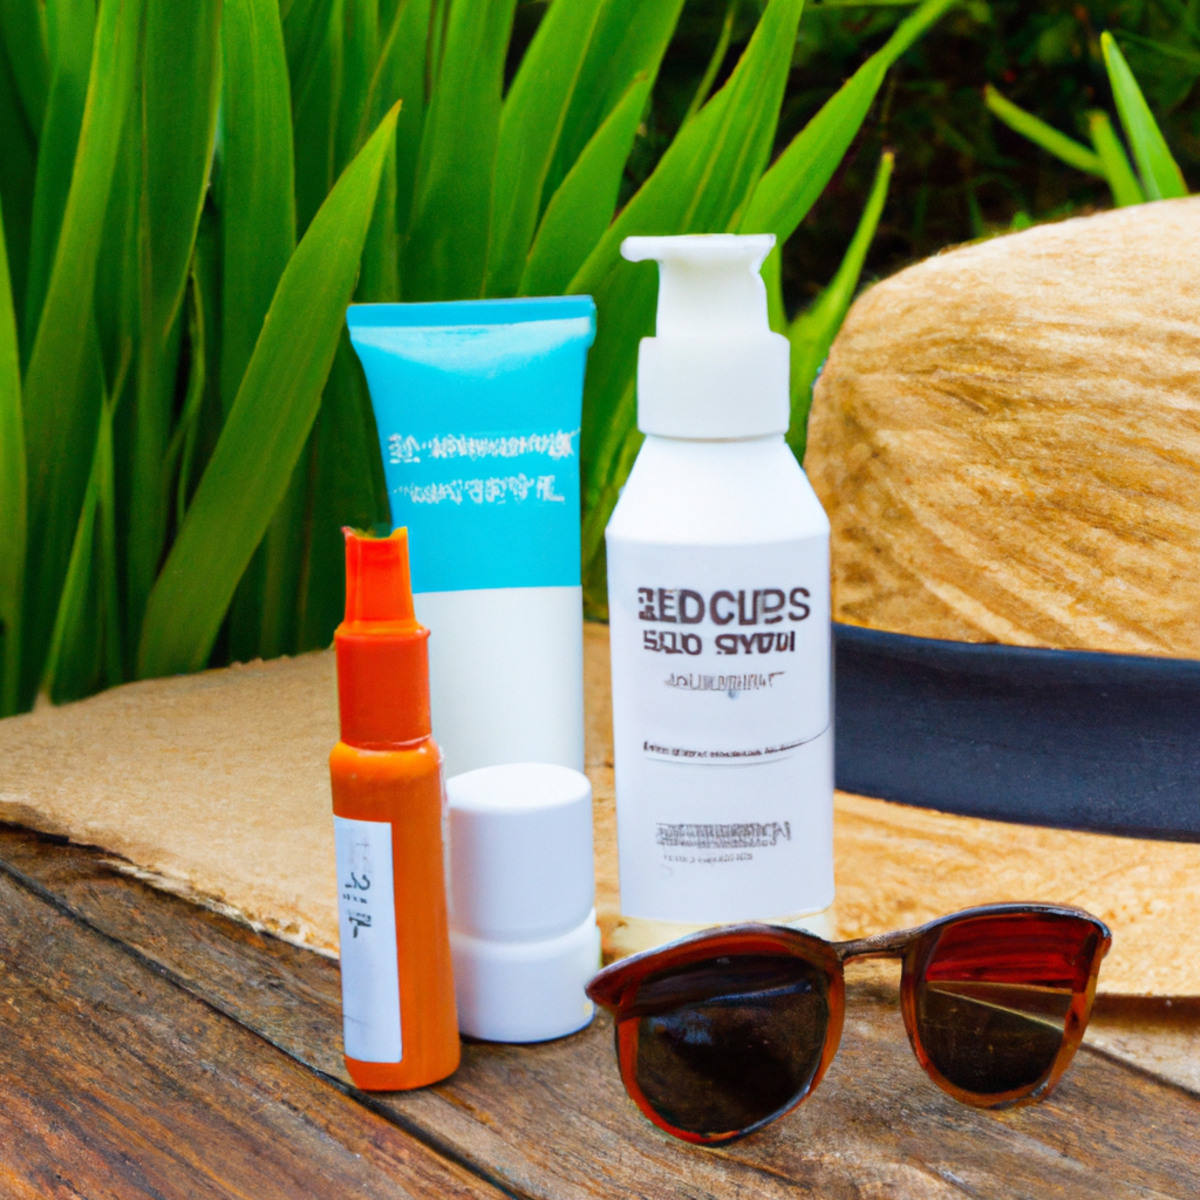 Sun protection and SPF products - Protect your skin from the sun's harmful rays with these natural skin care routines that are as refreshing as a day at the beach 